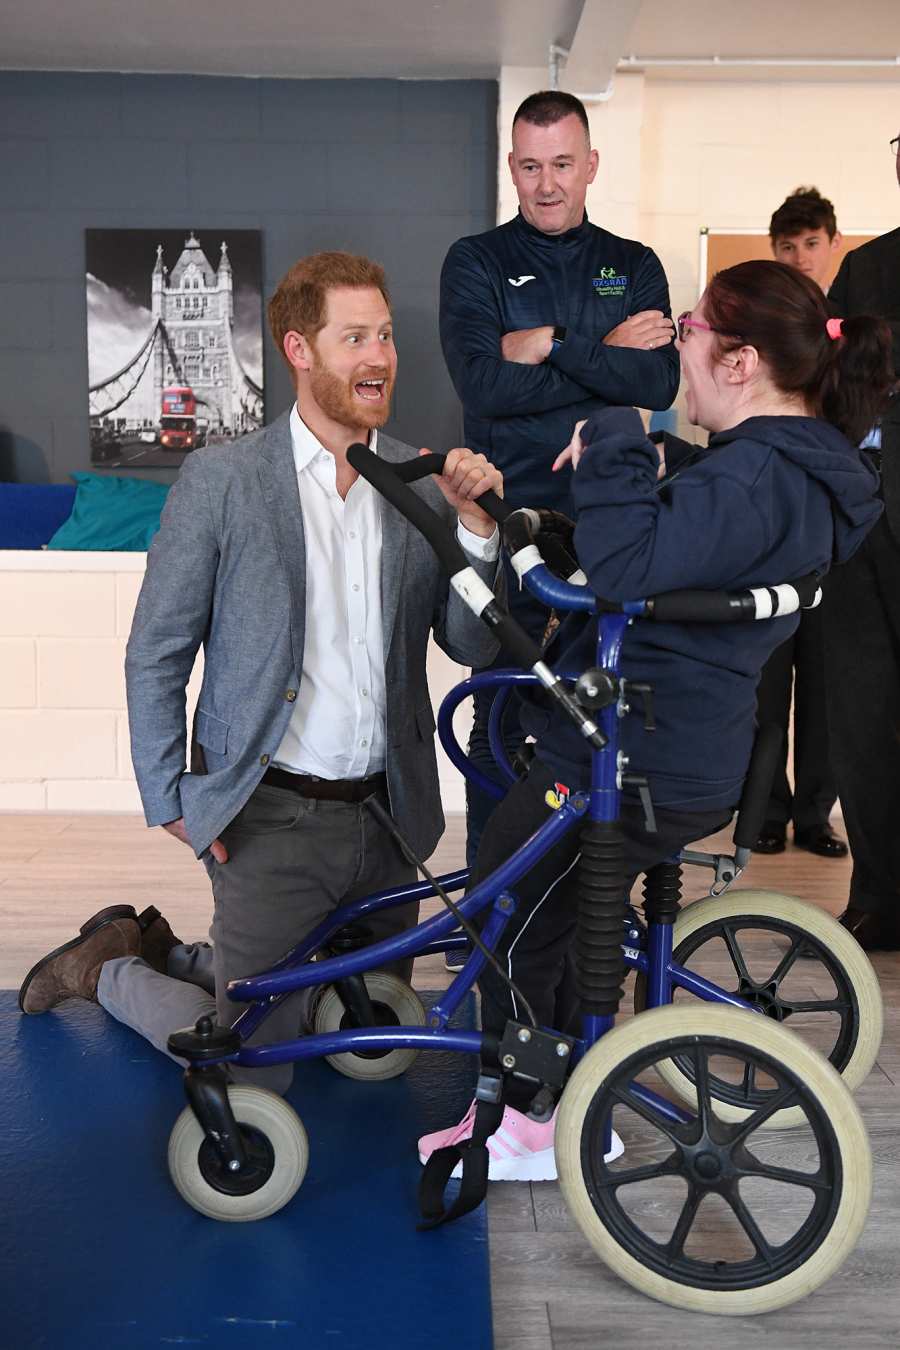 Prince Harry Visits Oxsrad Centre Opened By Princess Diana